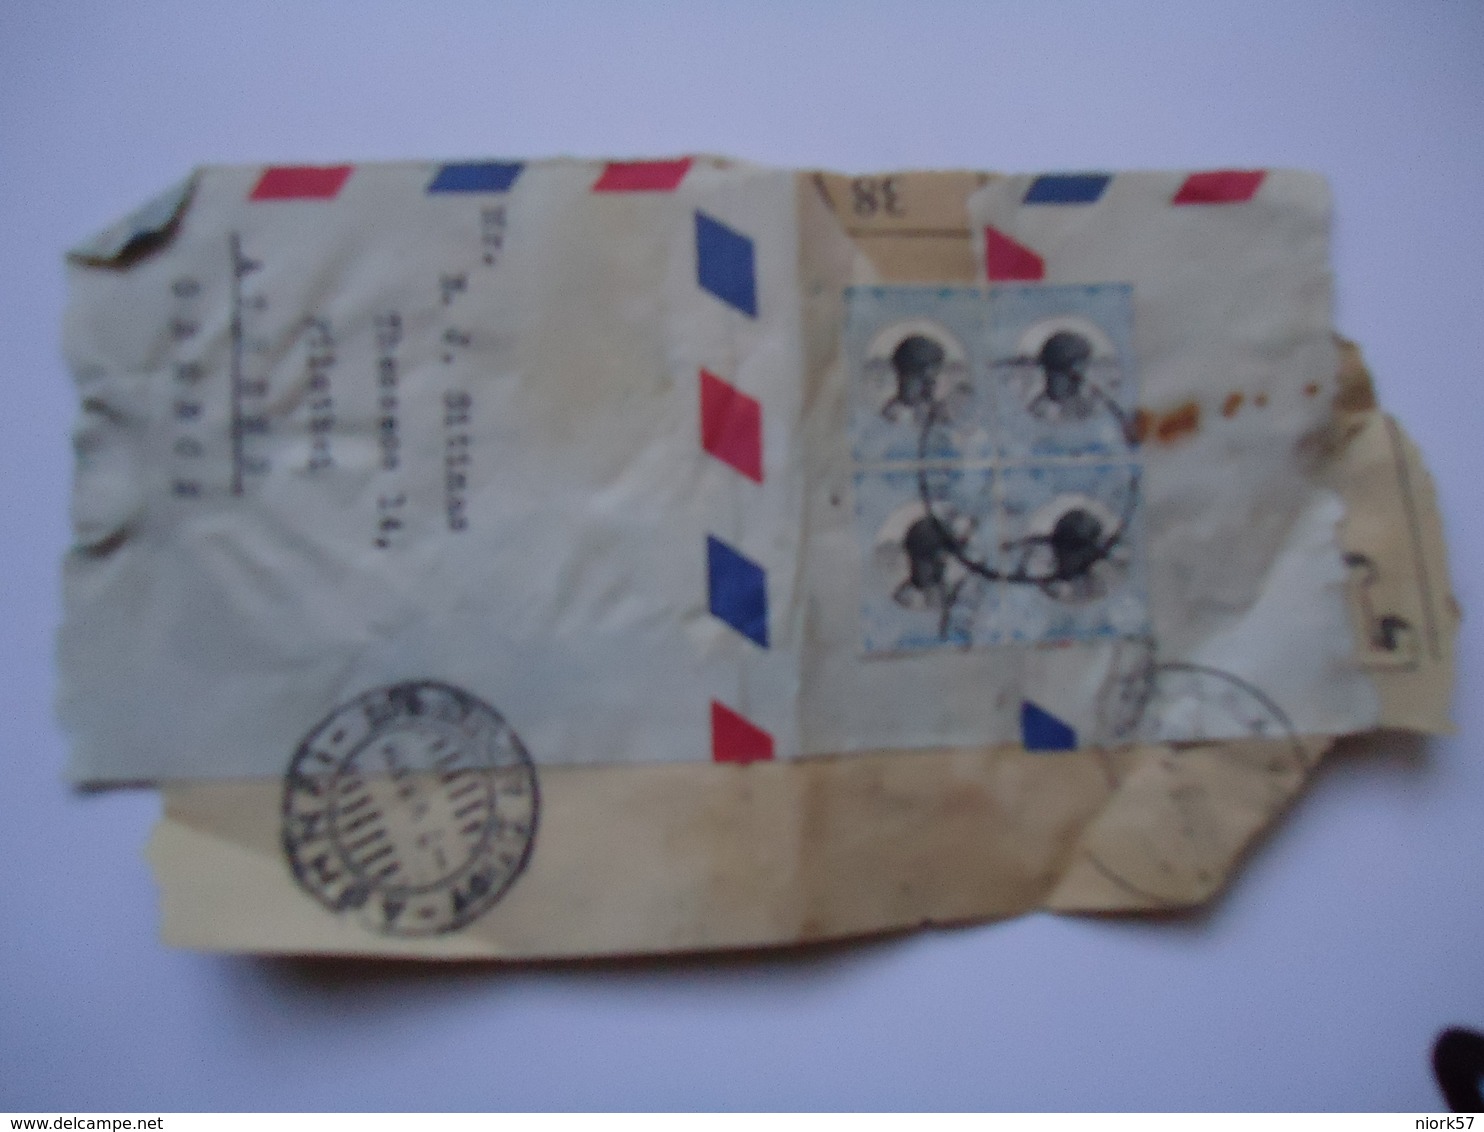 GREECE SUDAN  STAMPS ON PAPERS   WITH POSTMARK  1959  ATHENS XALANDRION - Flammes & Oblitérations